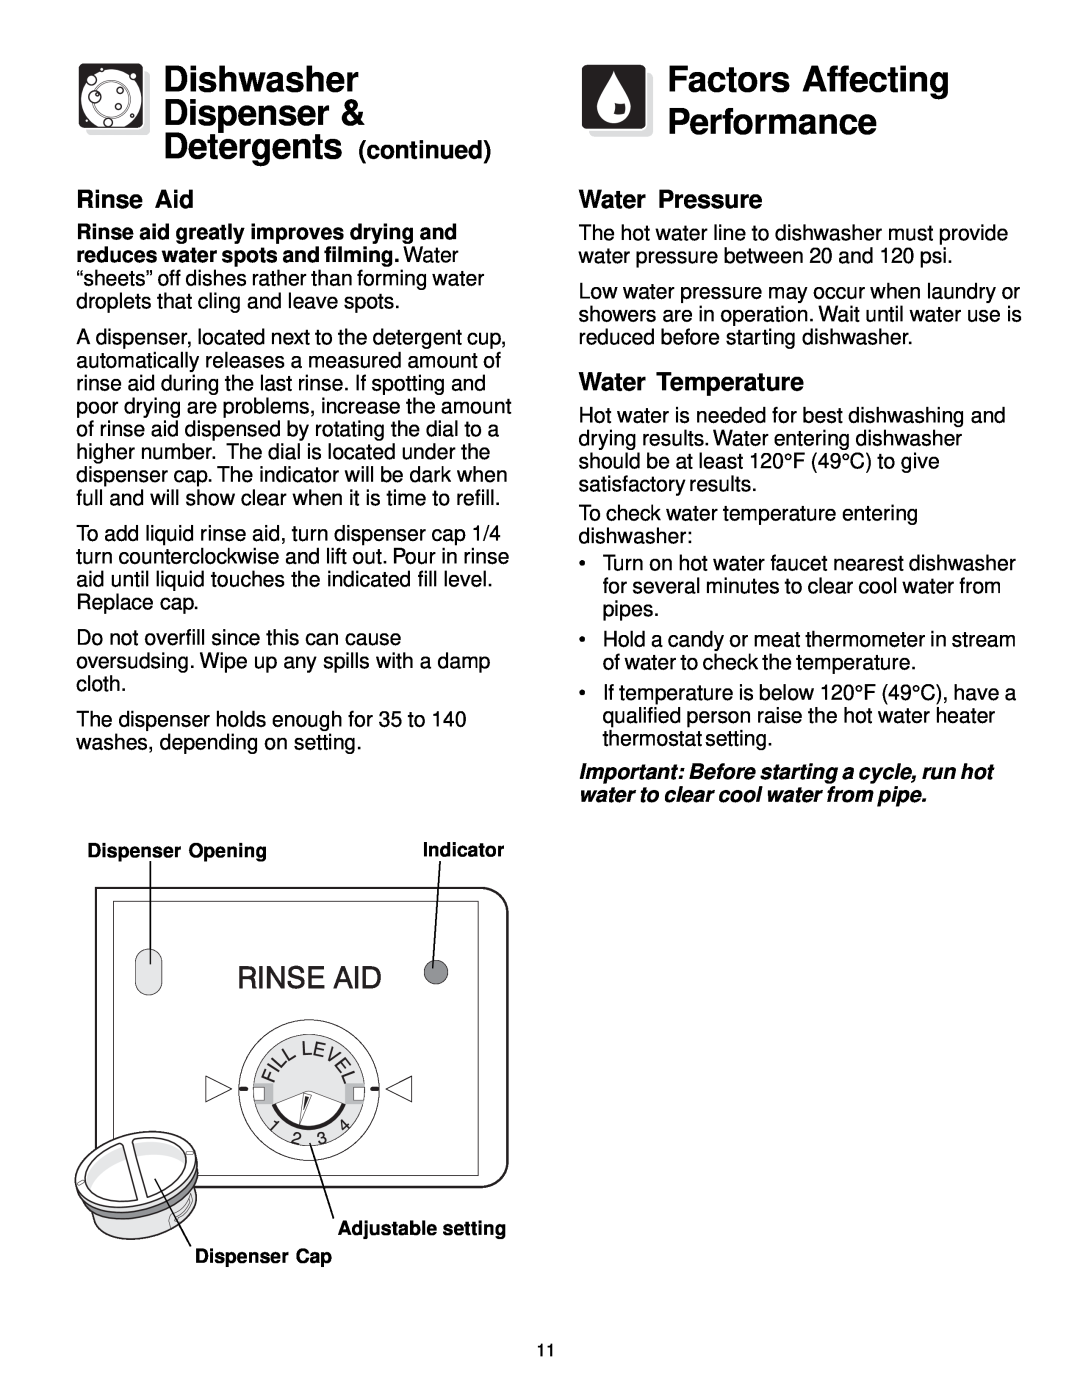 Frigidaire 400 Series Dishwasher Dispenser Detergents continued, Factors Affecting Performance, Rinse Aid, Water Pressure 